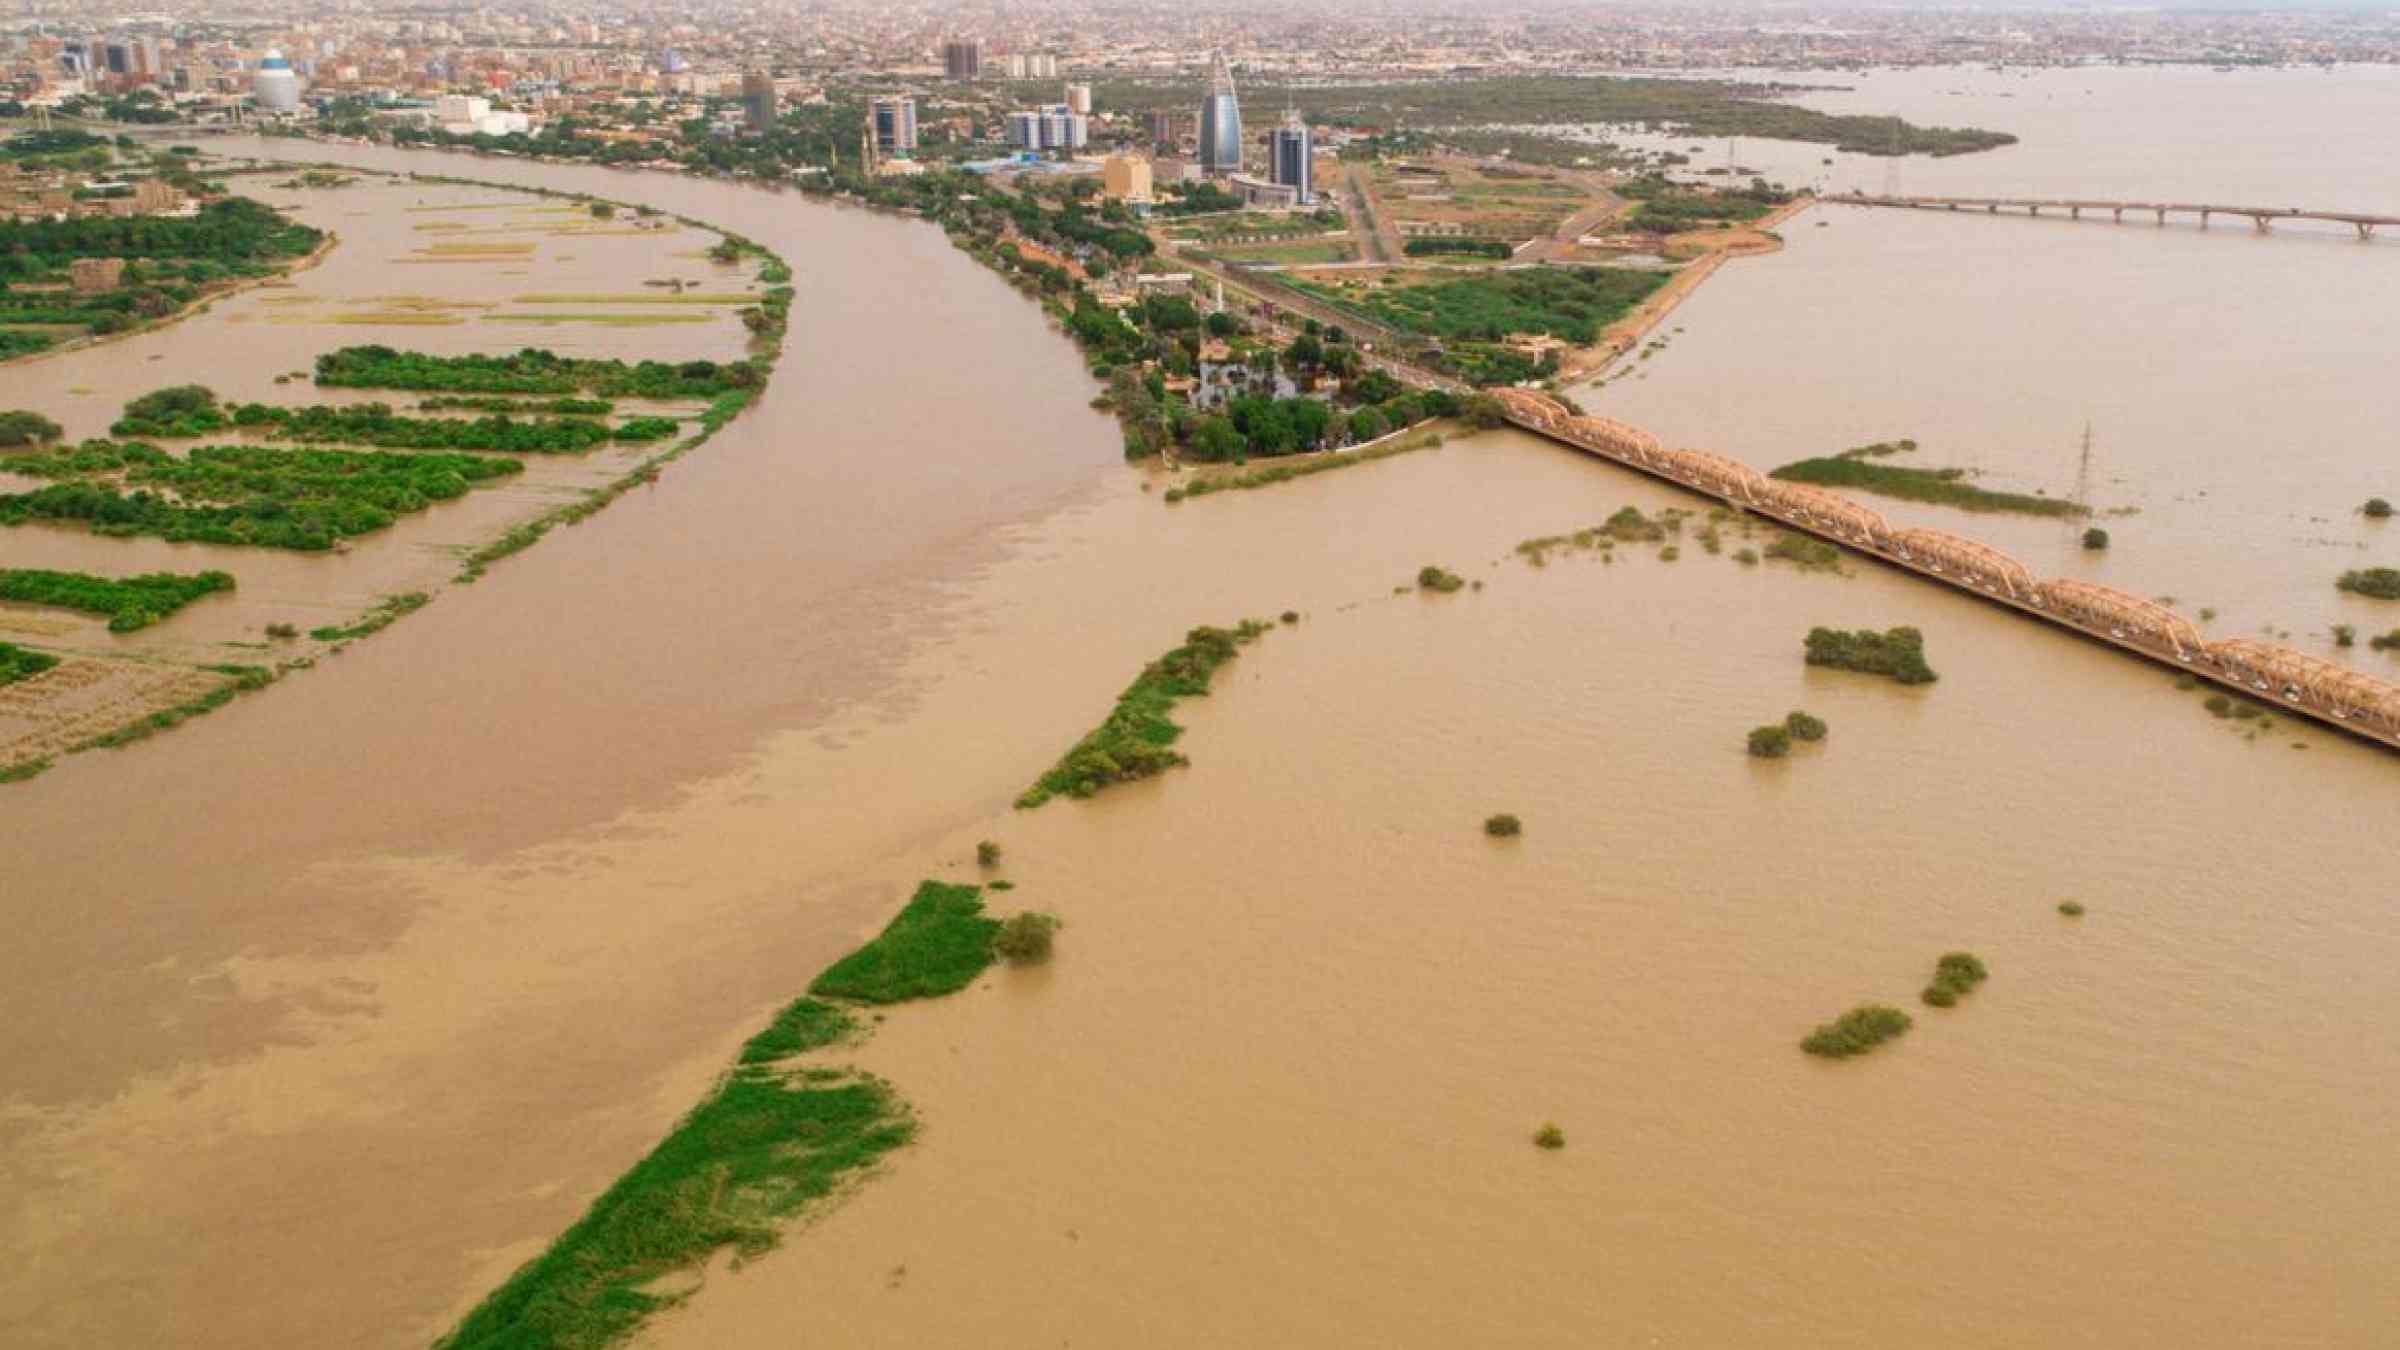 The extent of the impact of the September 2020 floods in Sudan that hit the capital, Khartoum. lier 4 life/Shutterstock